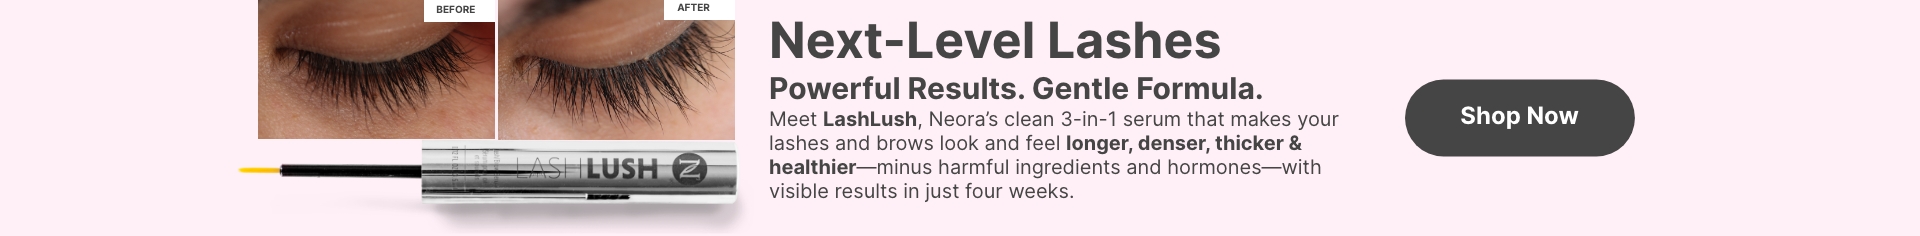 Before and after image using Neora’s Lash Lush 3-in-1 Brow and Lash Serum 